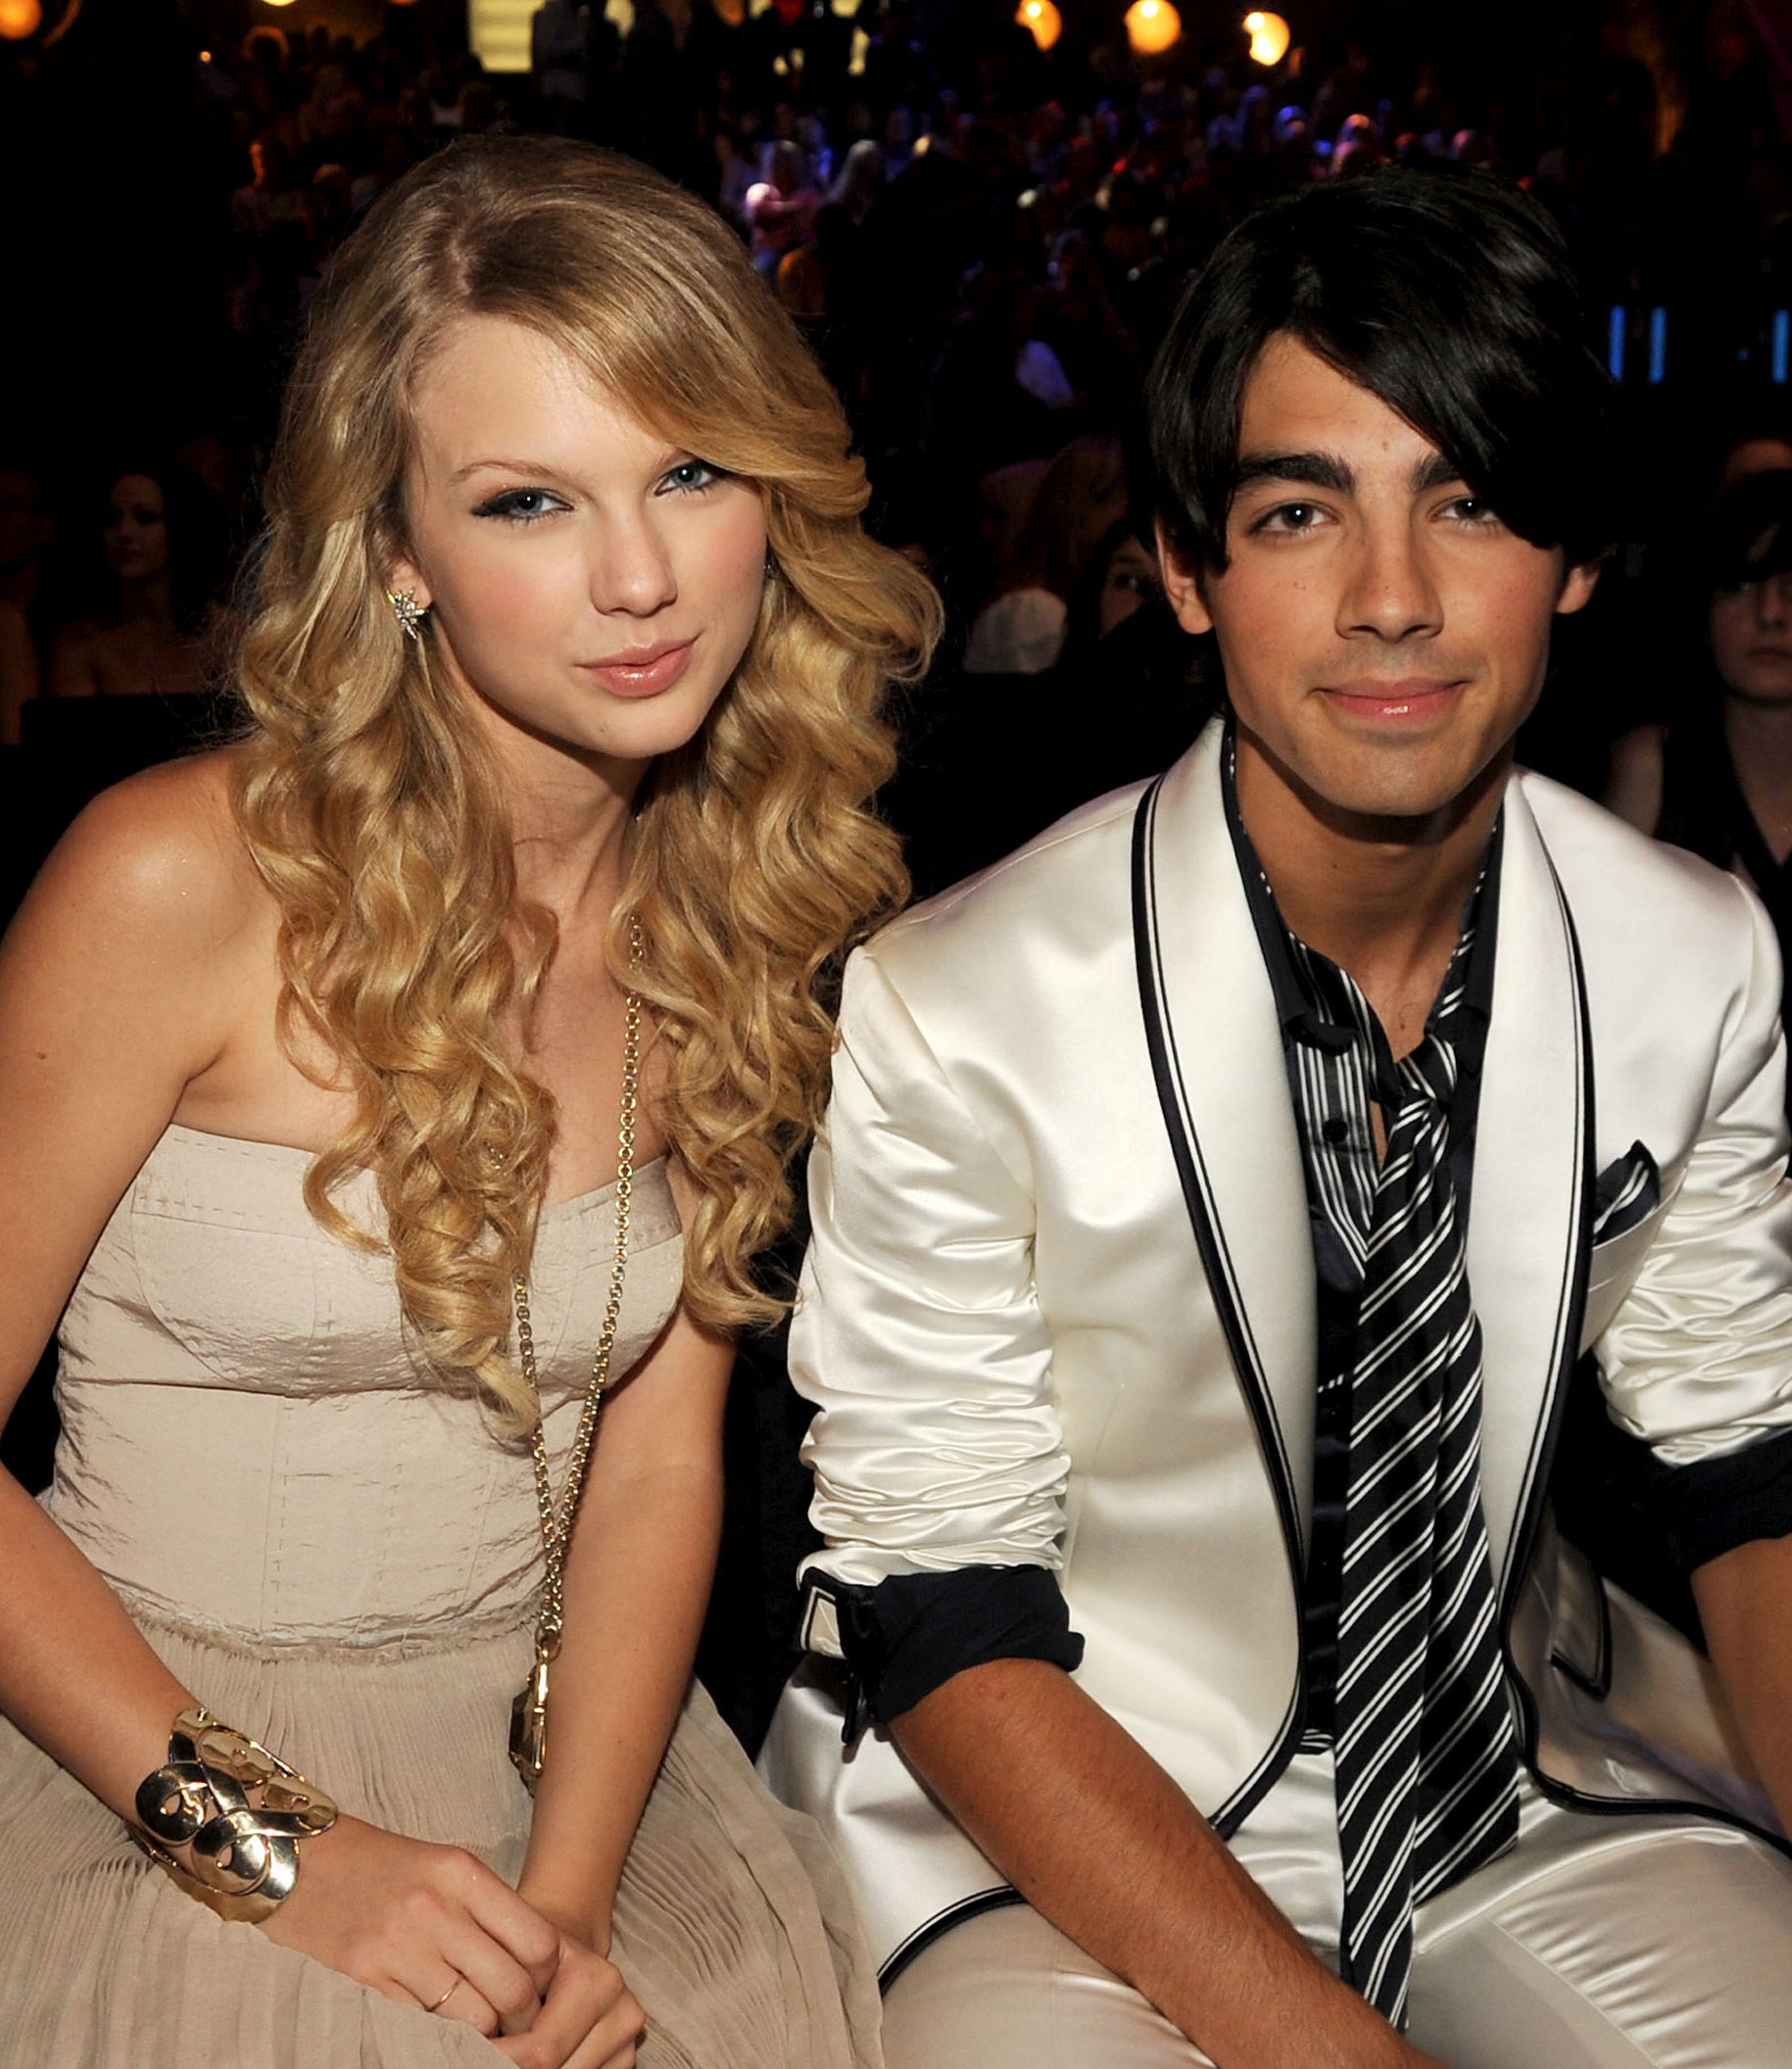 Close-up of Taylor and Joe sitting together